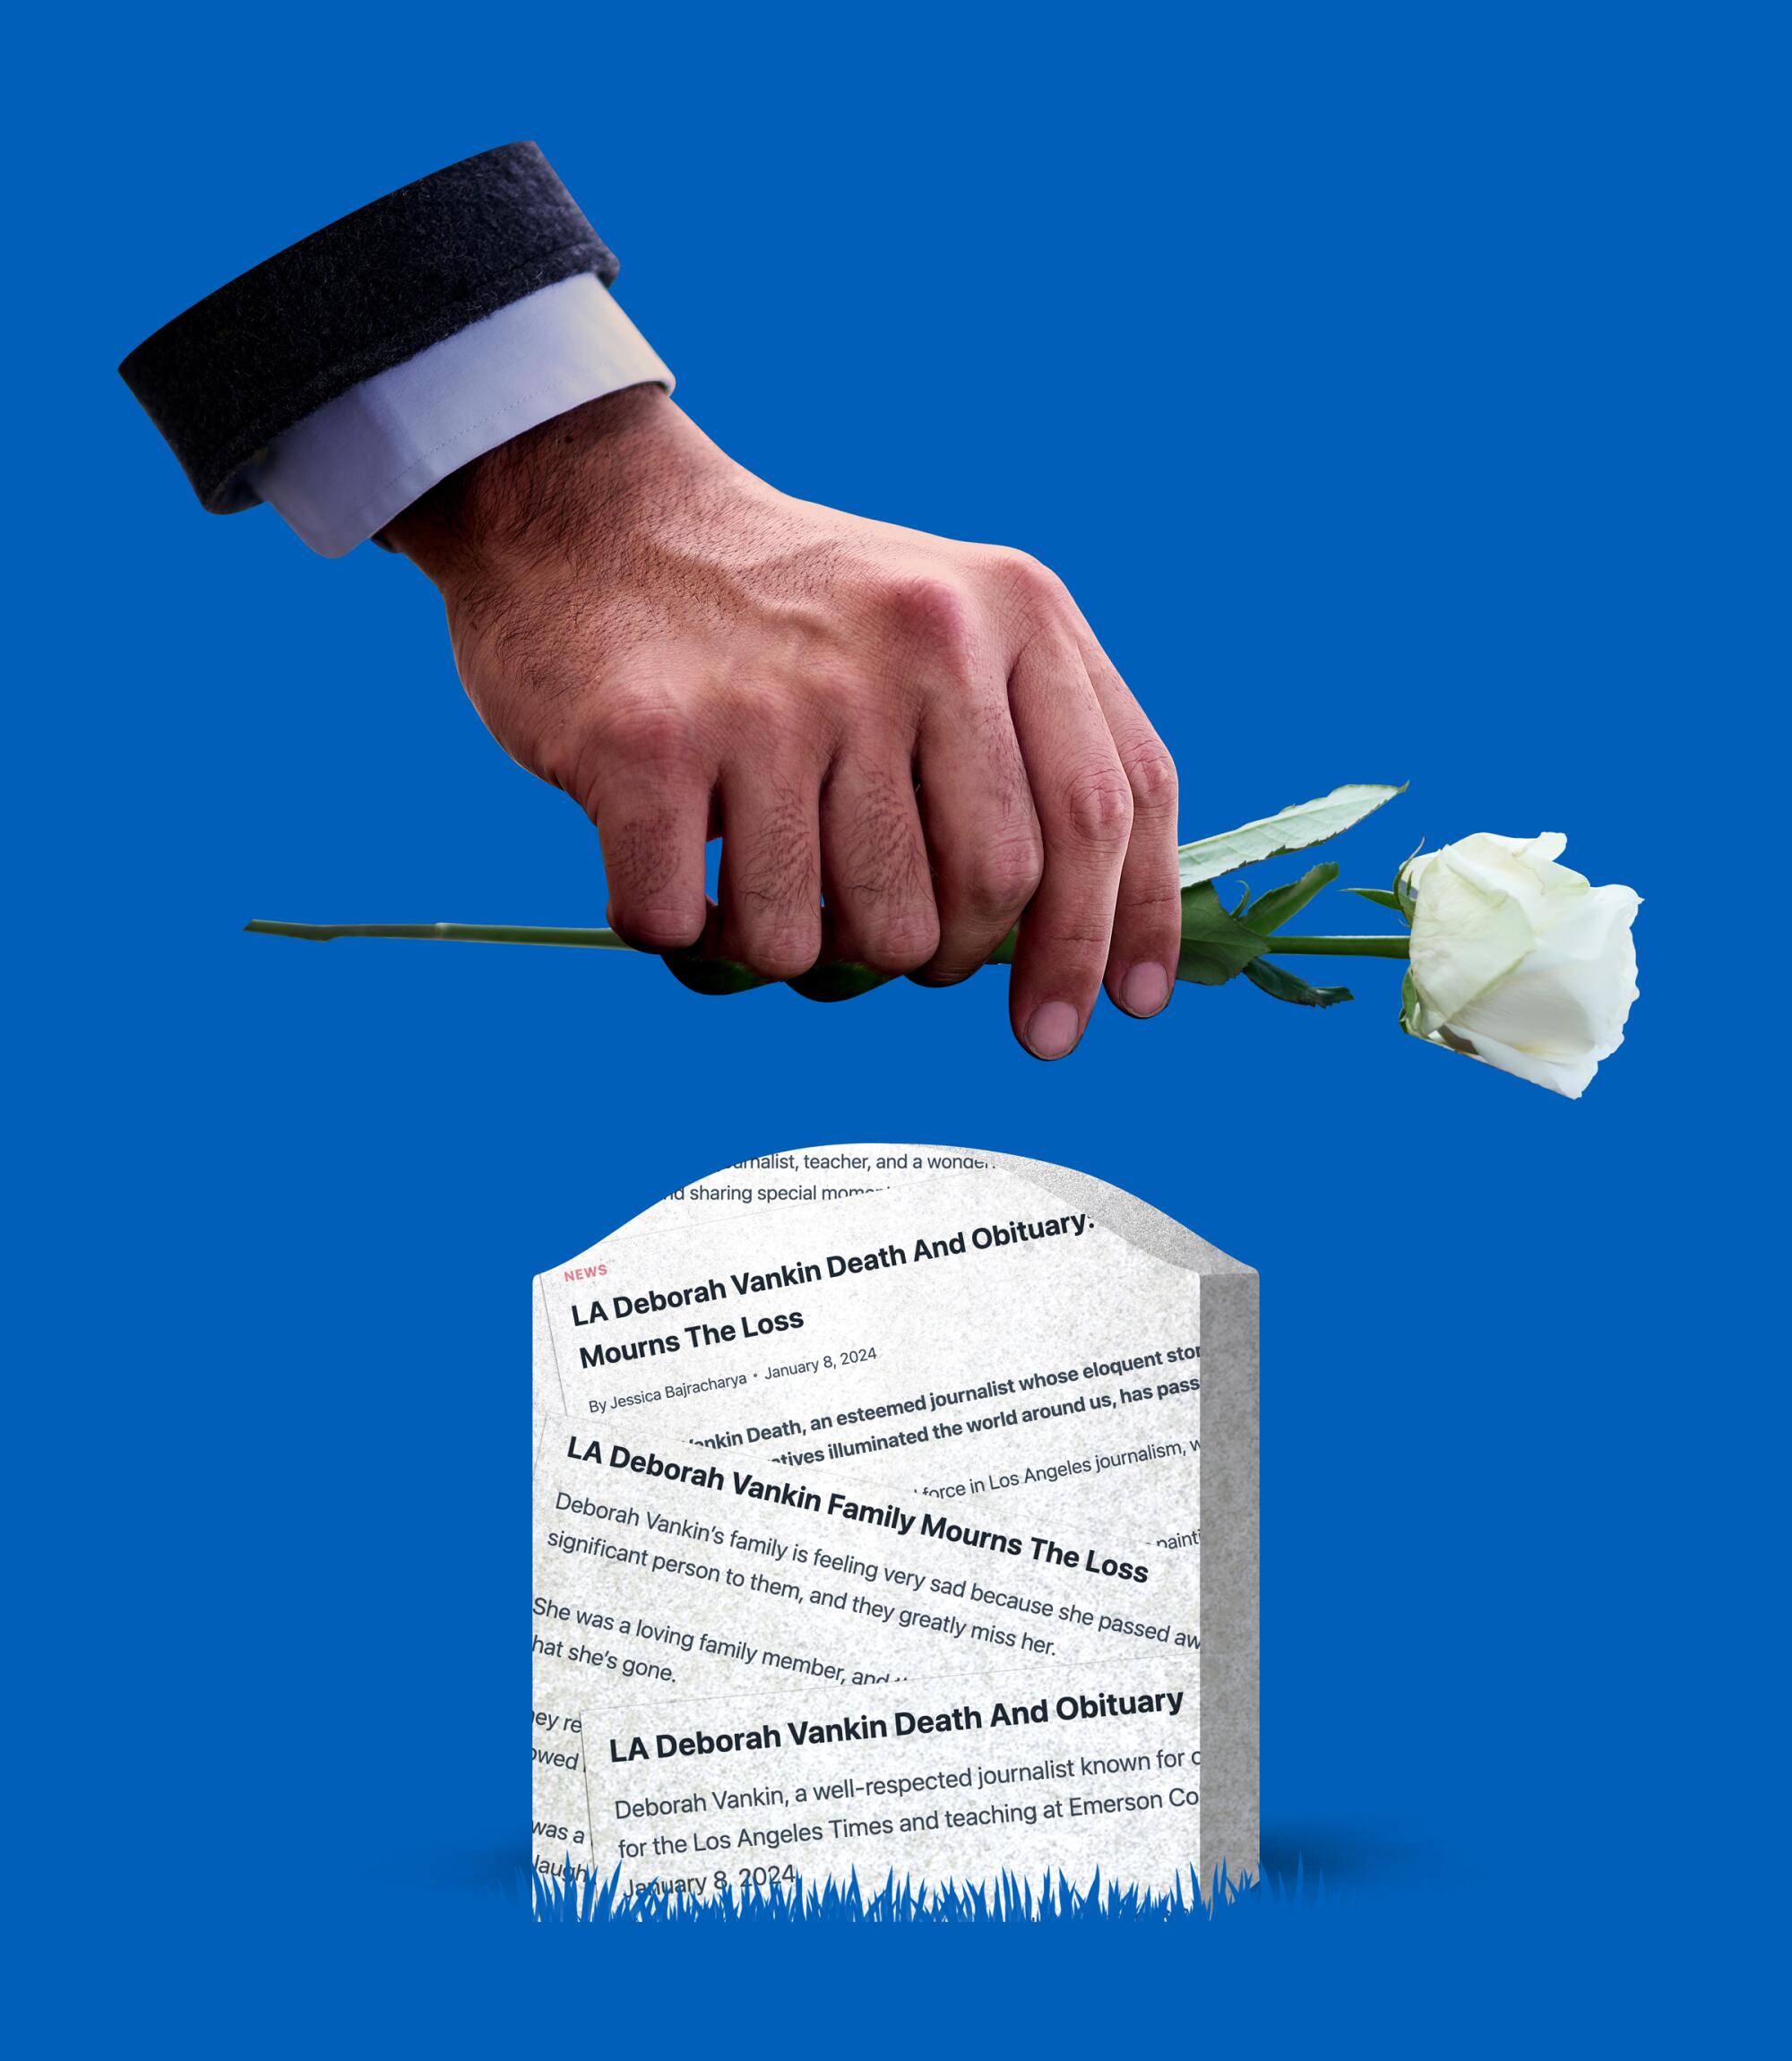 Photo illustration of a hand with extra fingers laying a white rose on a gravestone with screenshots